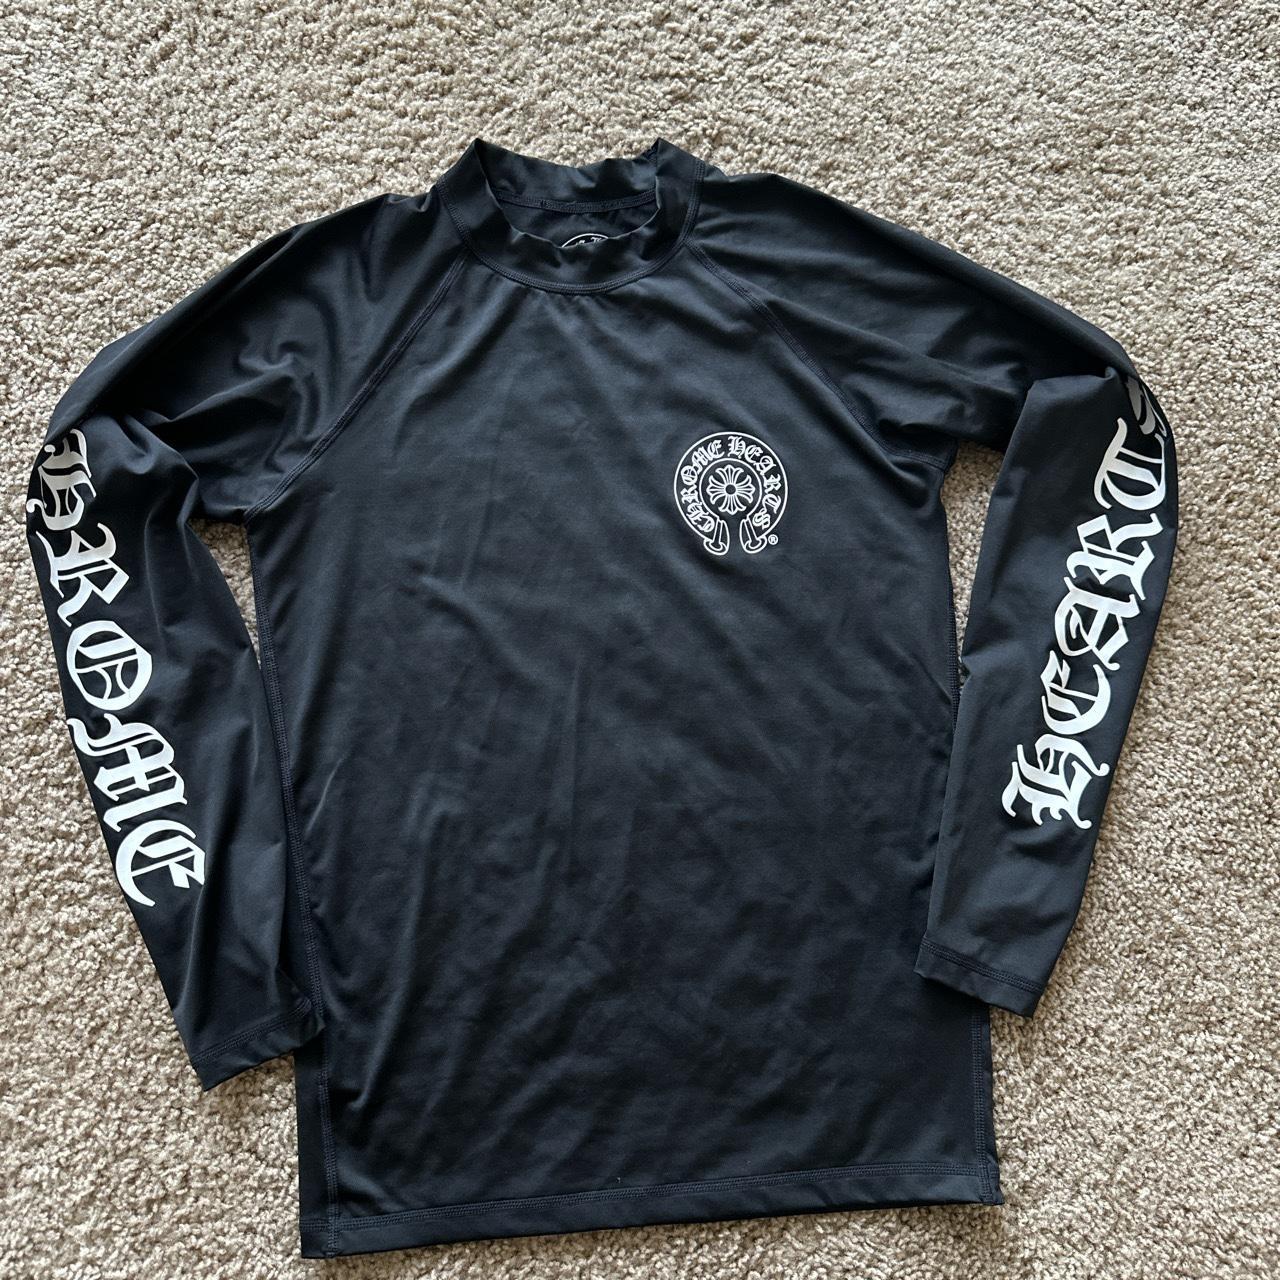 Chrome hearts rash guard for swimming, can be worn... - Depop